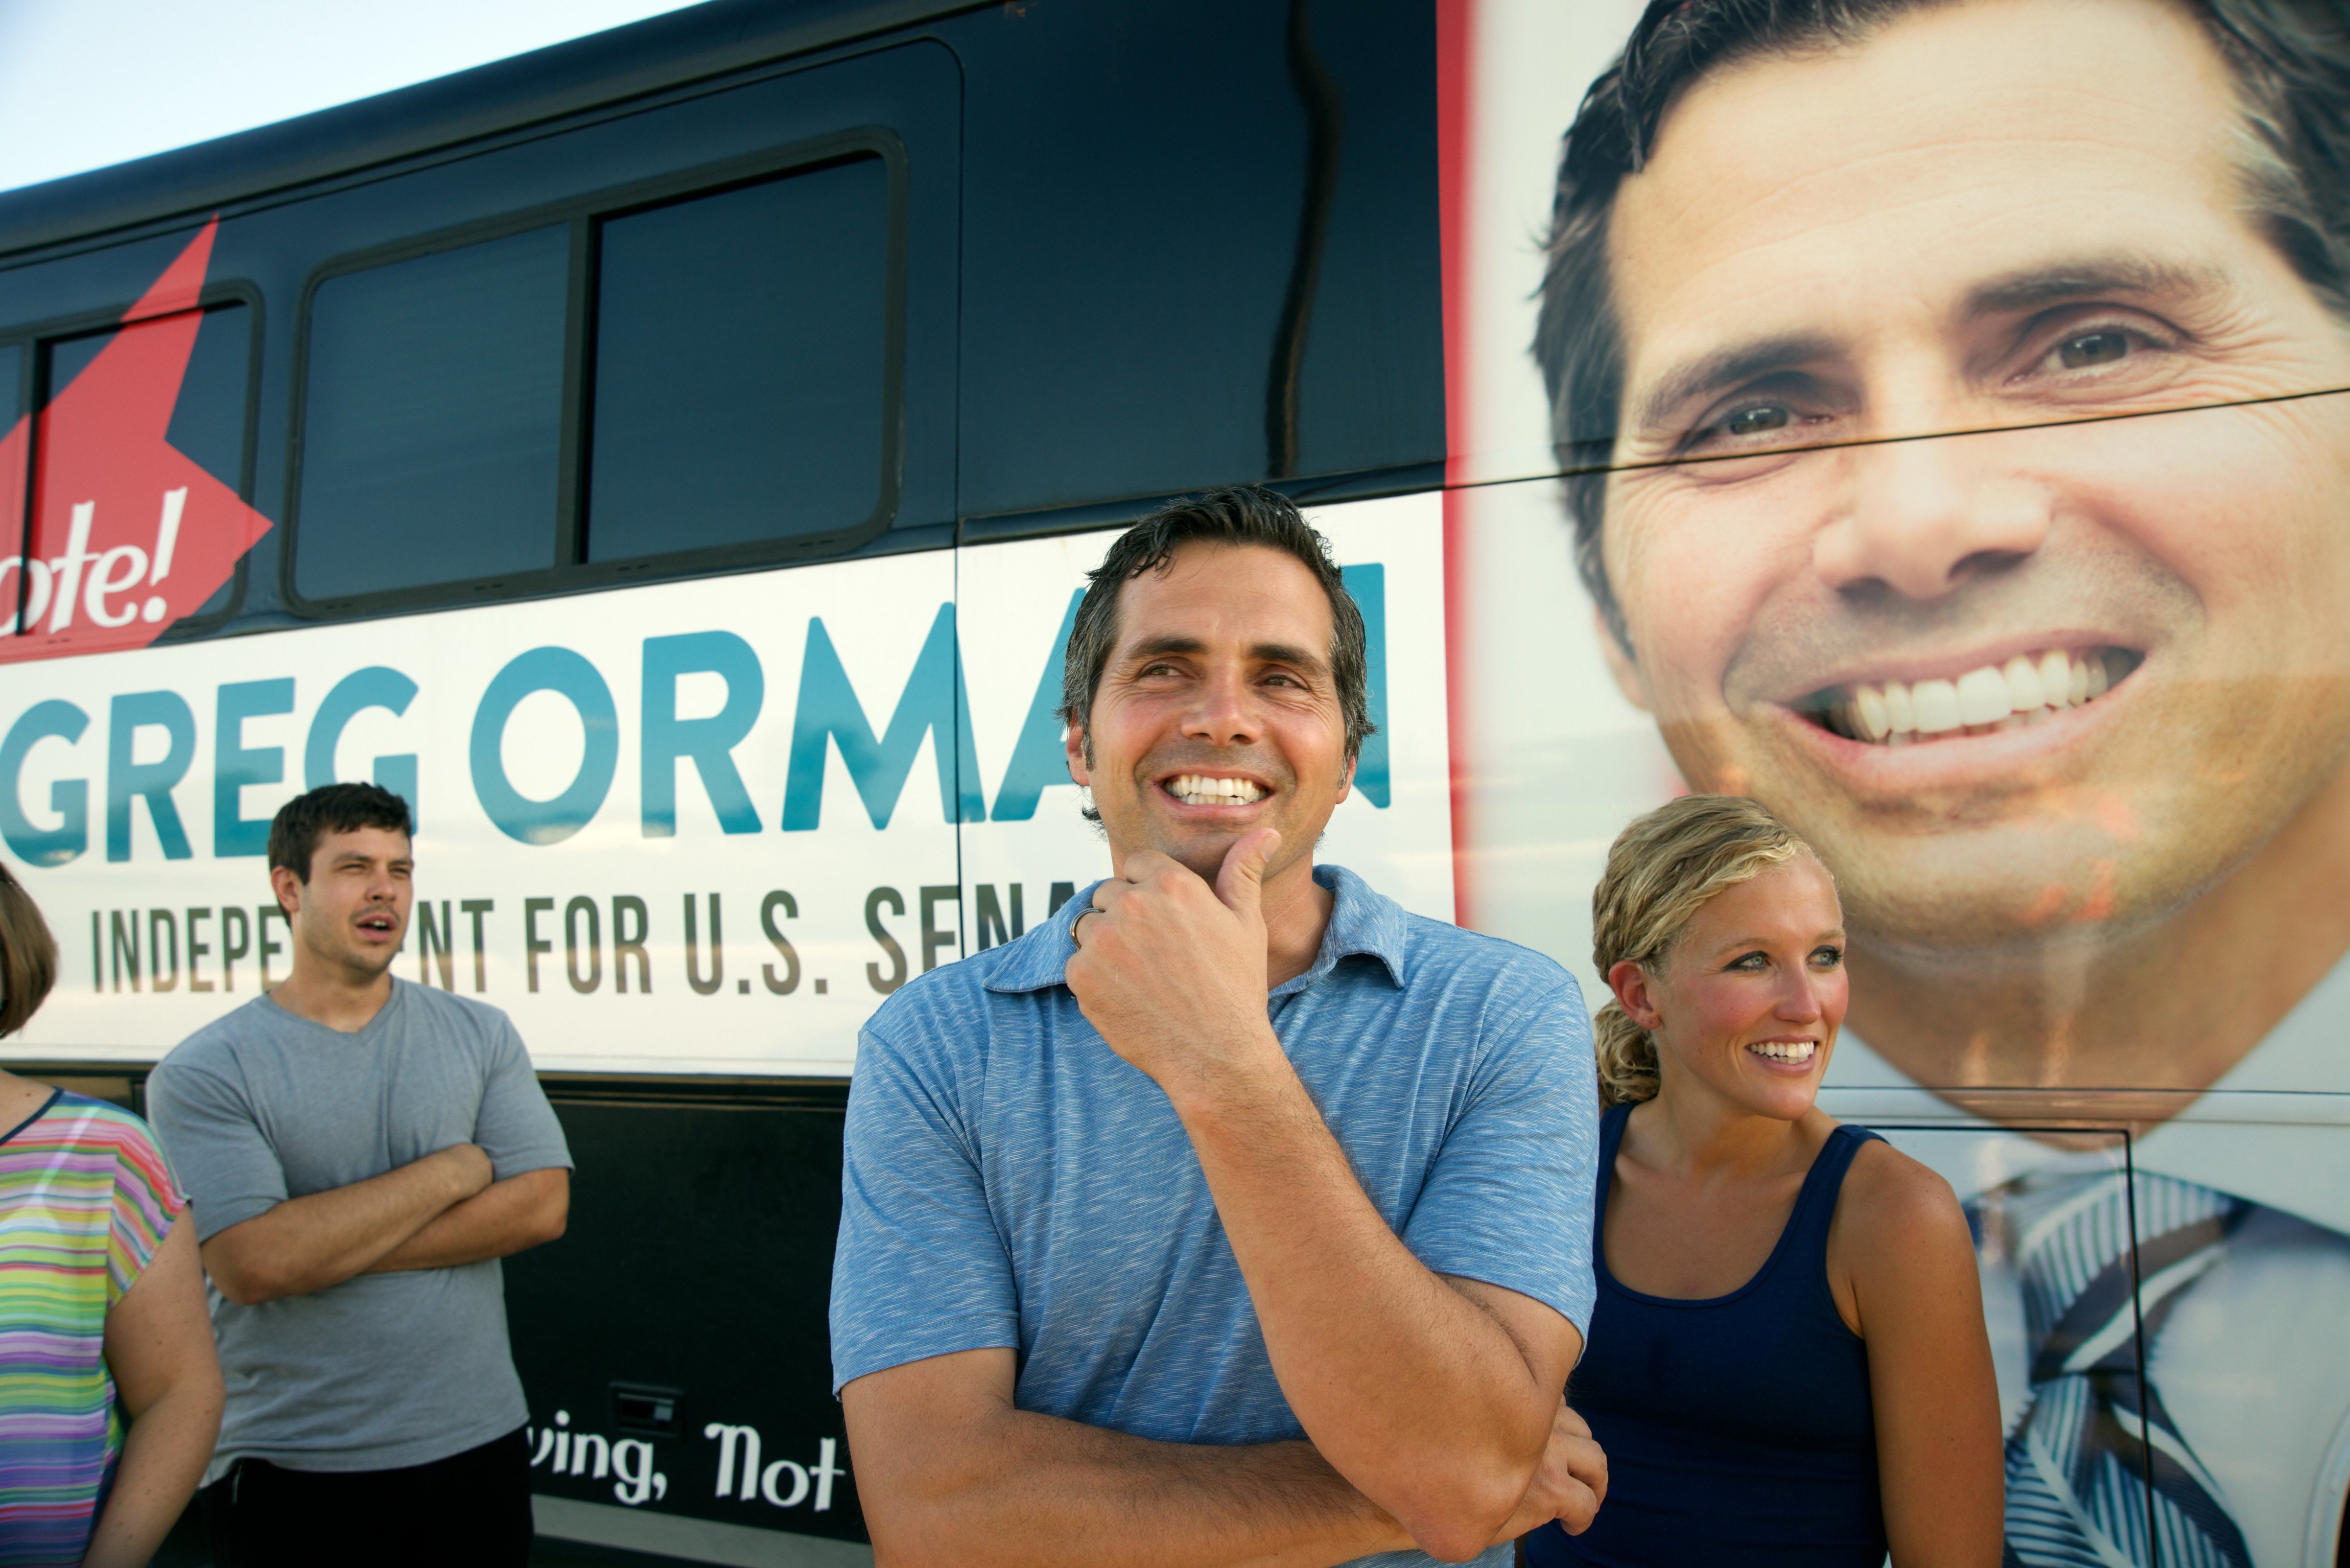 Independent U.S. Senate candidate Greg Orman poses with his wife Sybil at the Clint Bowyers Community Center in the west end of Emporia, Kans., (Mark Reinstein—Corbis)